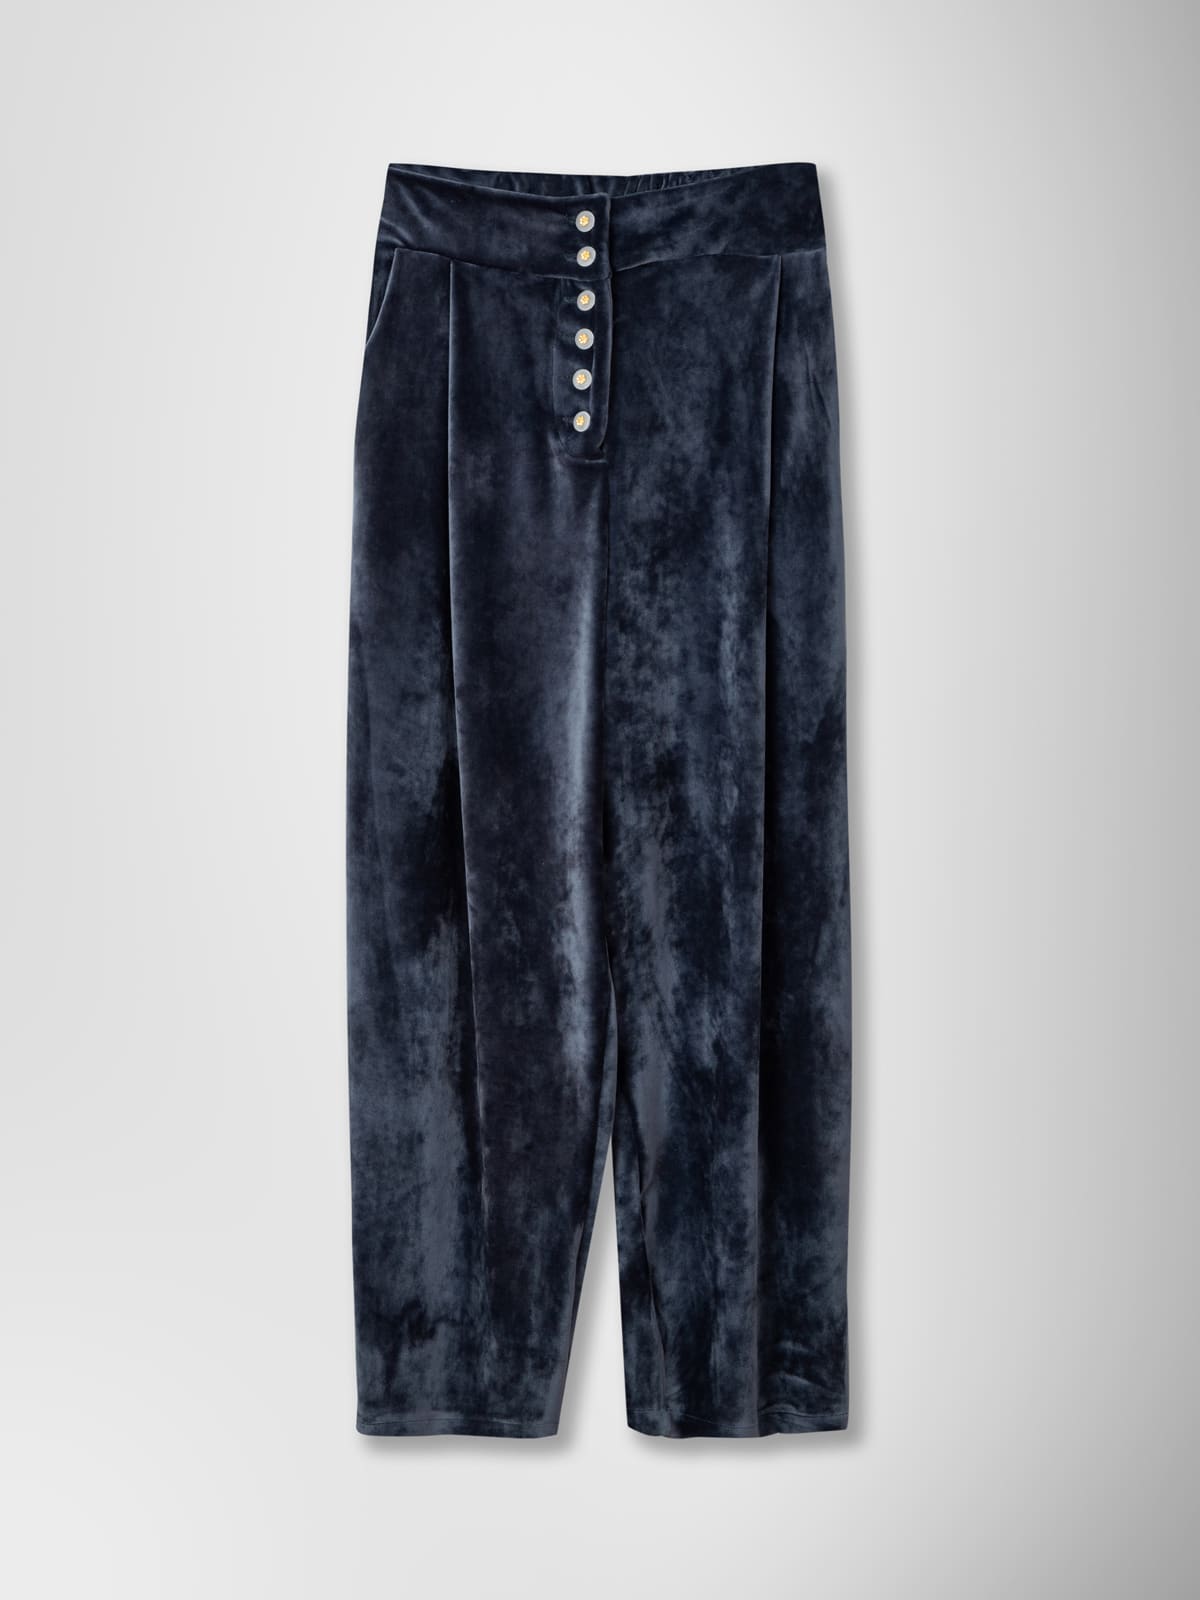 TROUSER BLUE WITH BUTTON